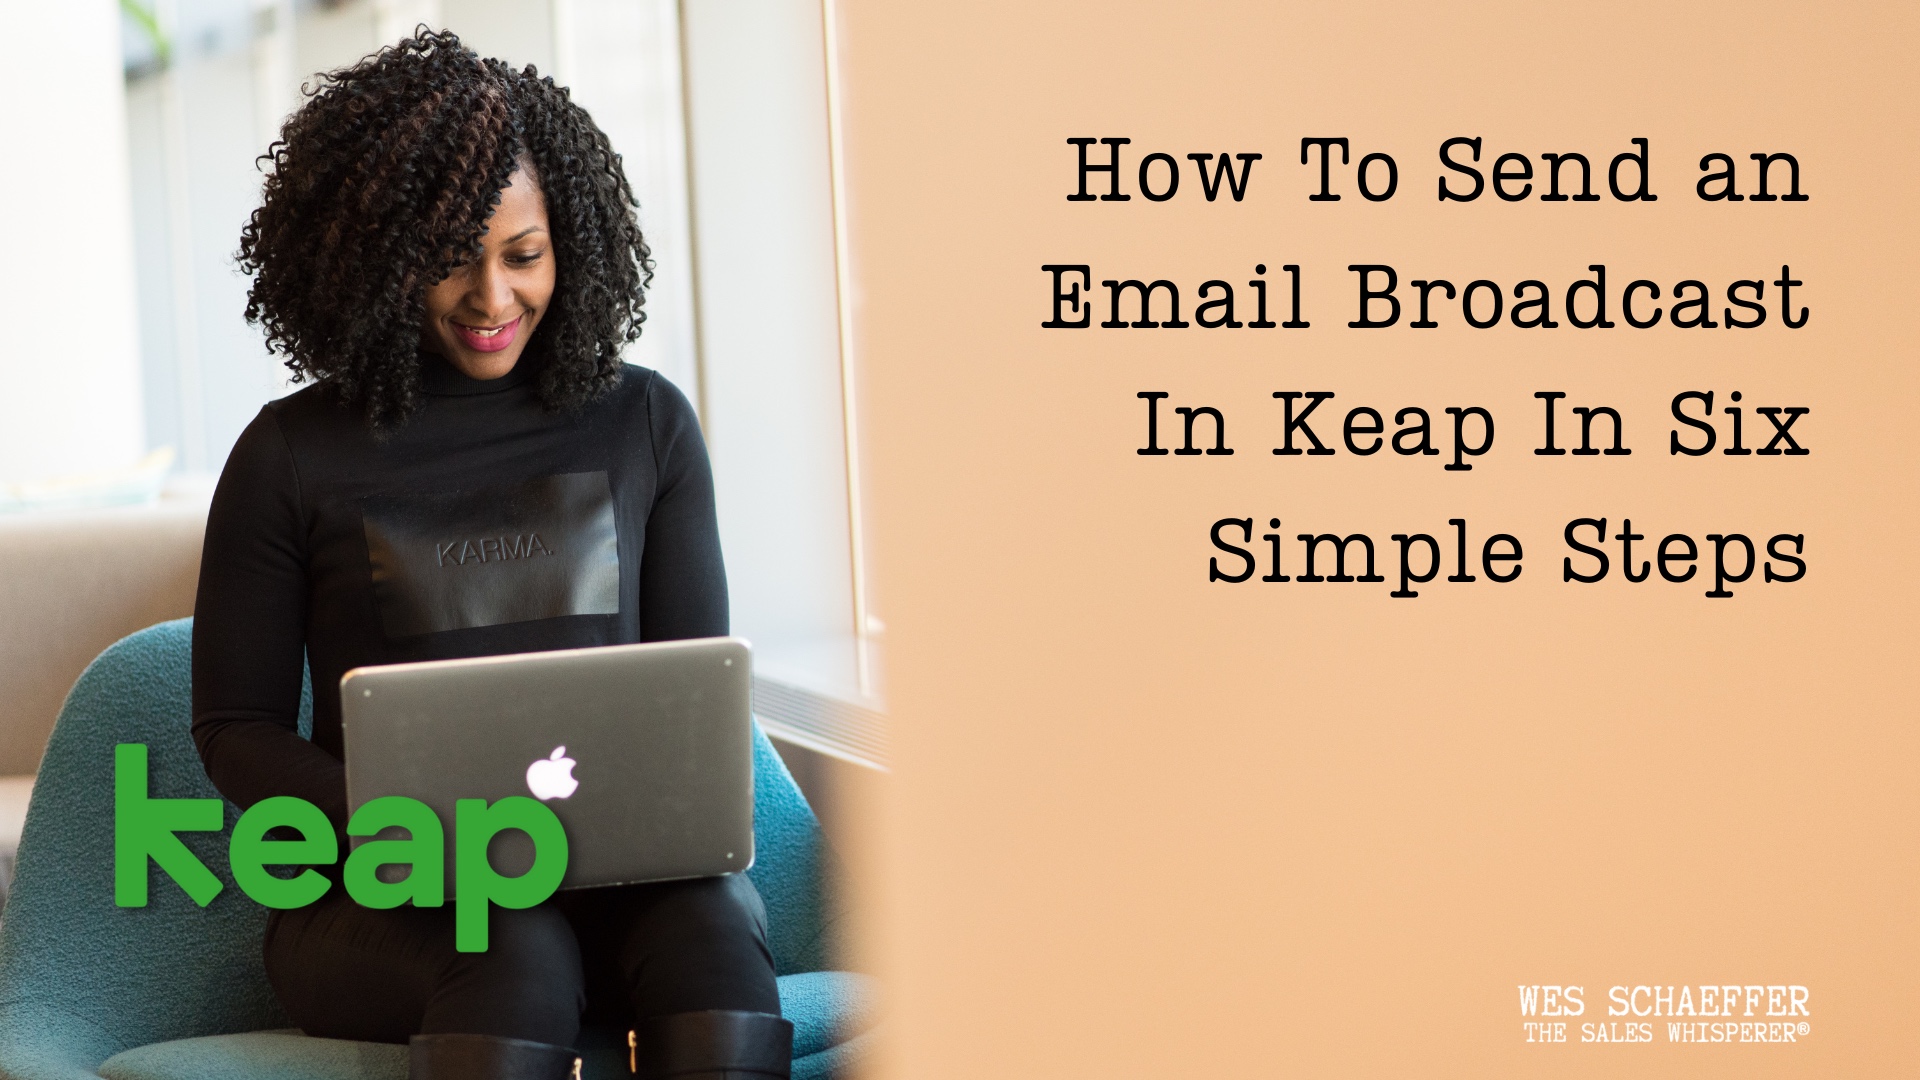 Send a Keap email broadcast easily following these digital marketing best practices.